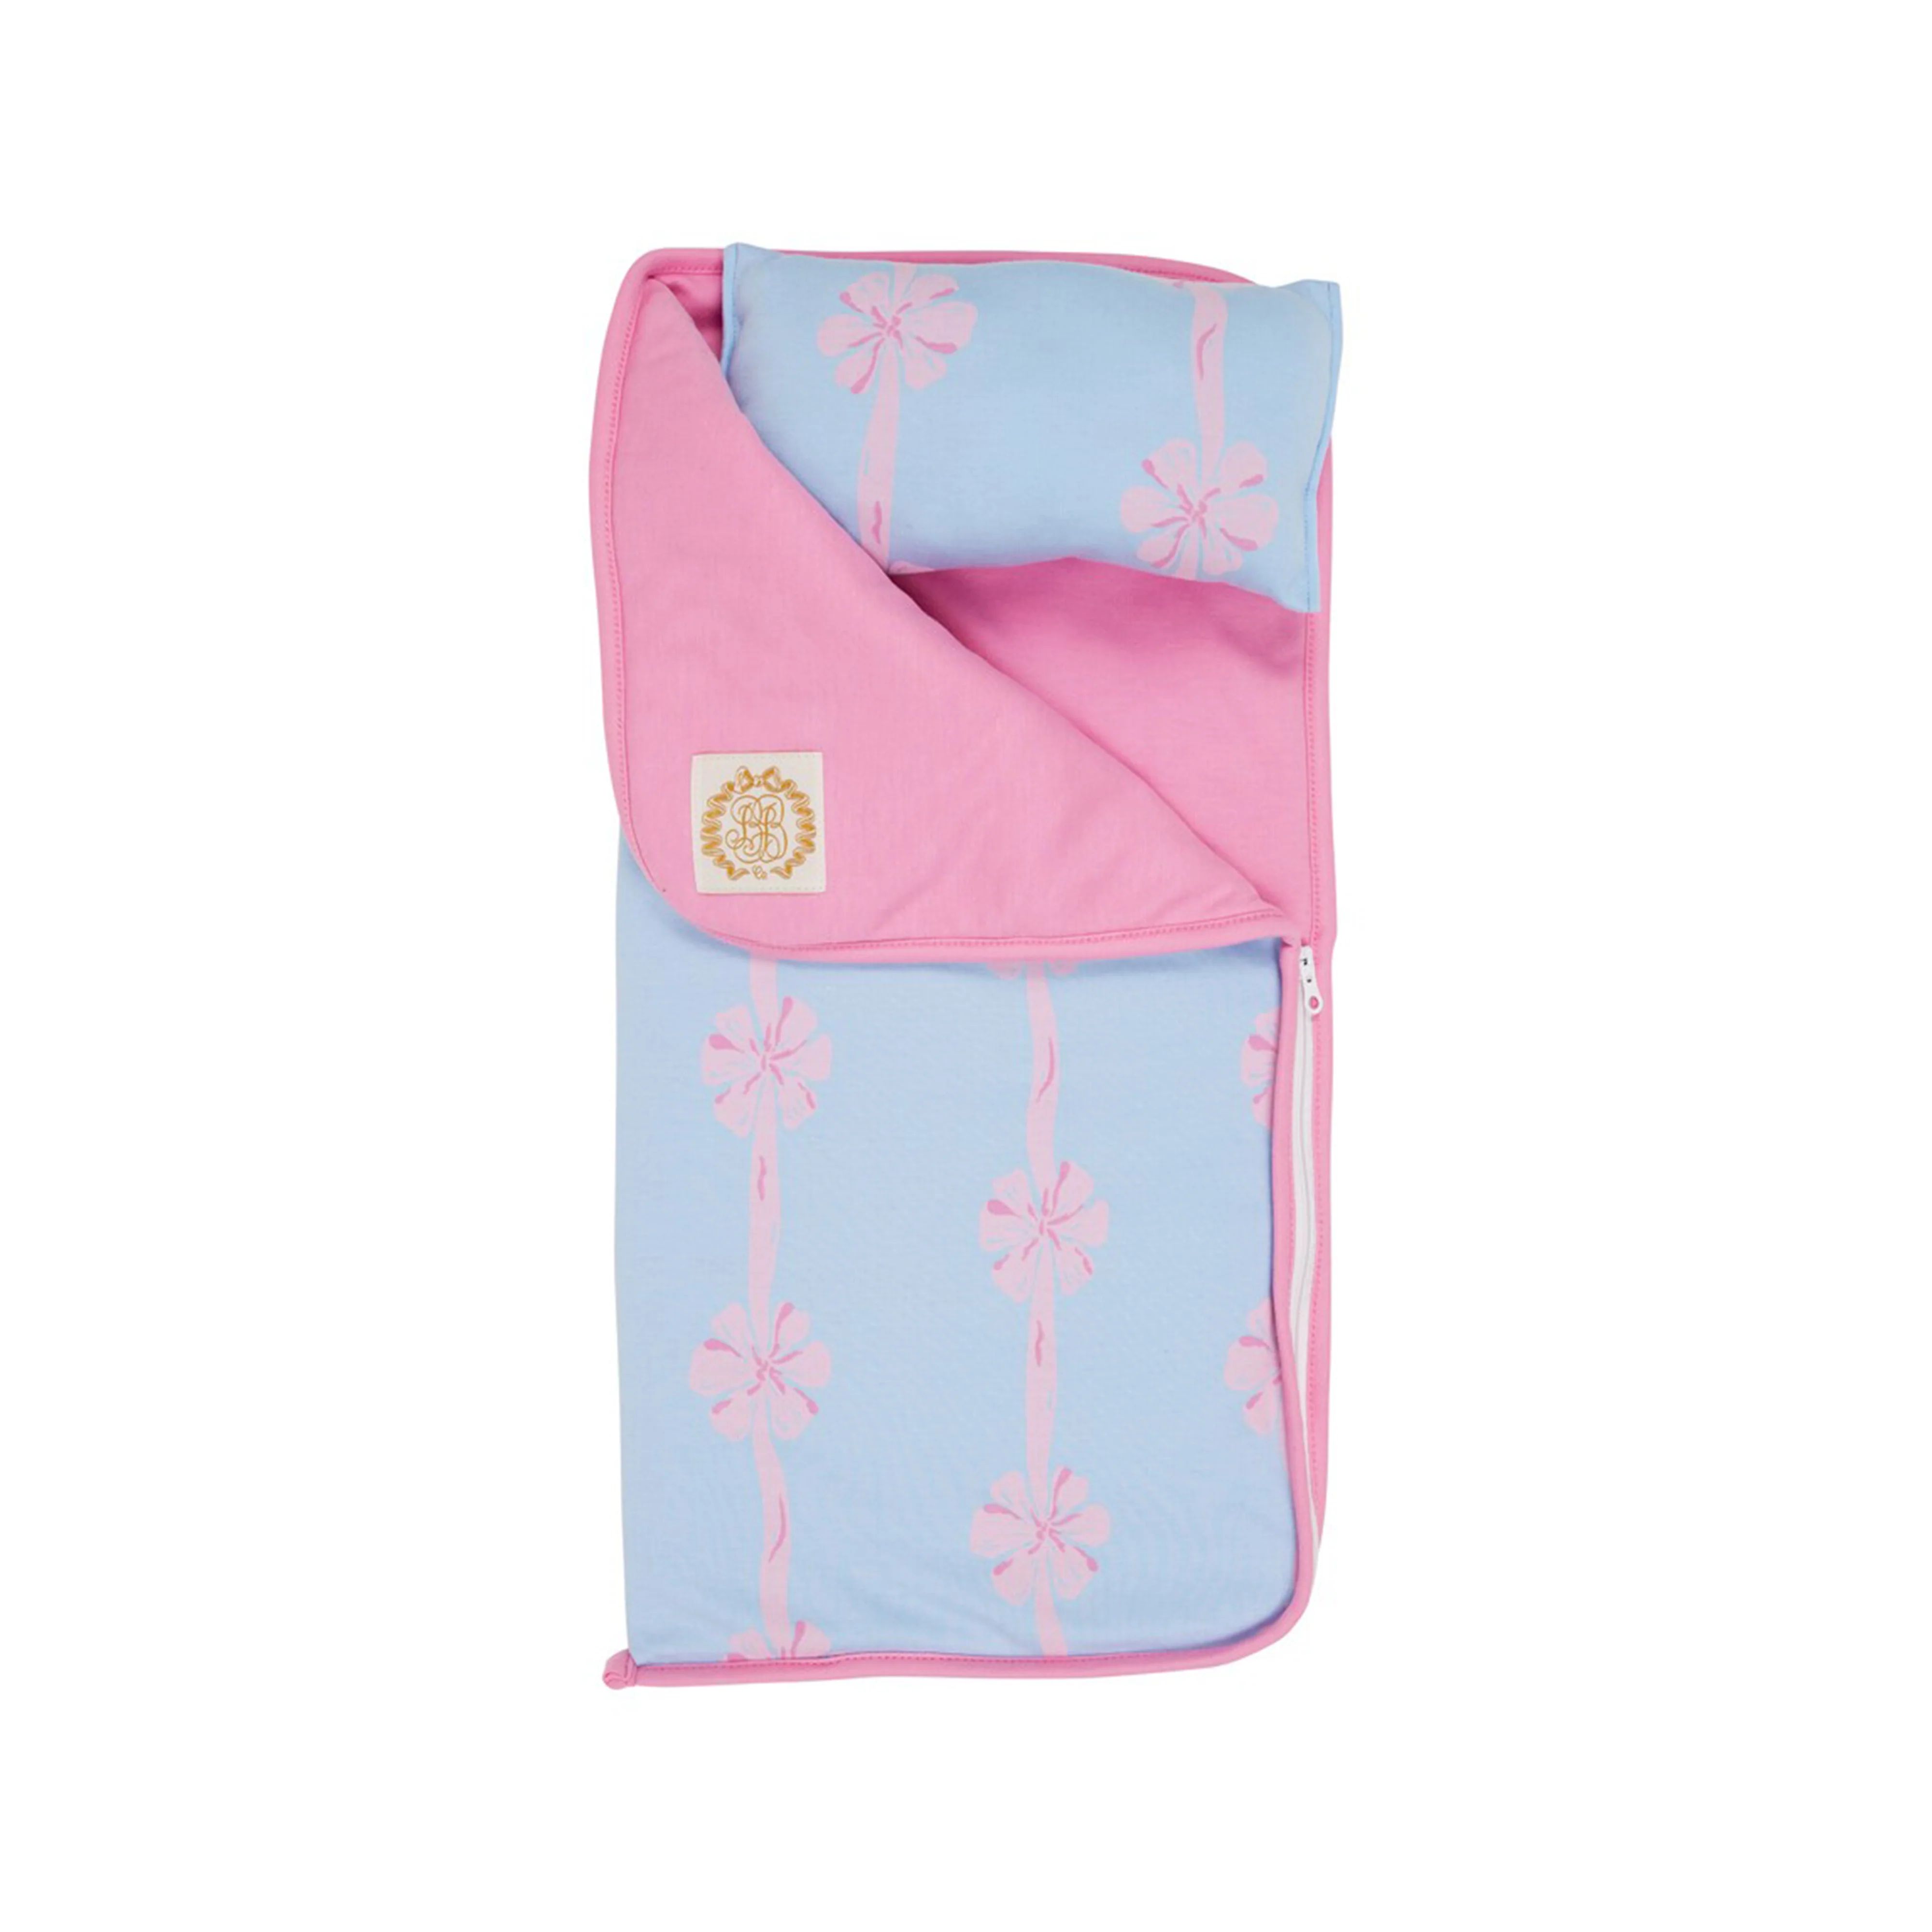 Dolly's Sleeping Bag - No Bow, No Go with Hamptons Hot Pink | The Beaufort Bonnet Company